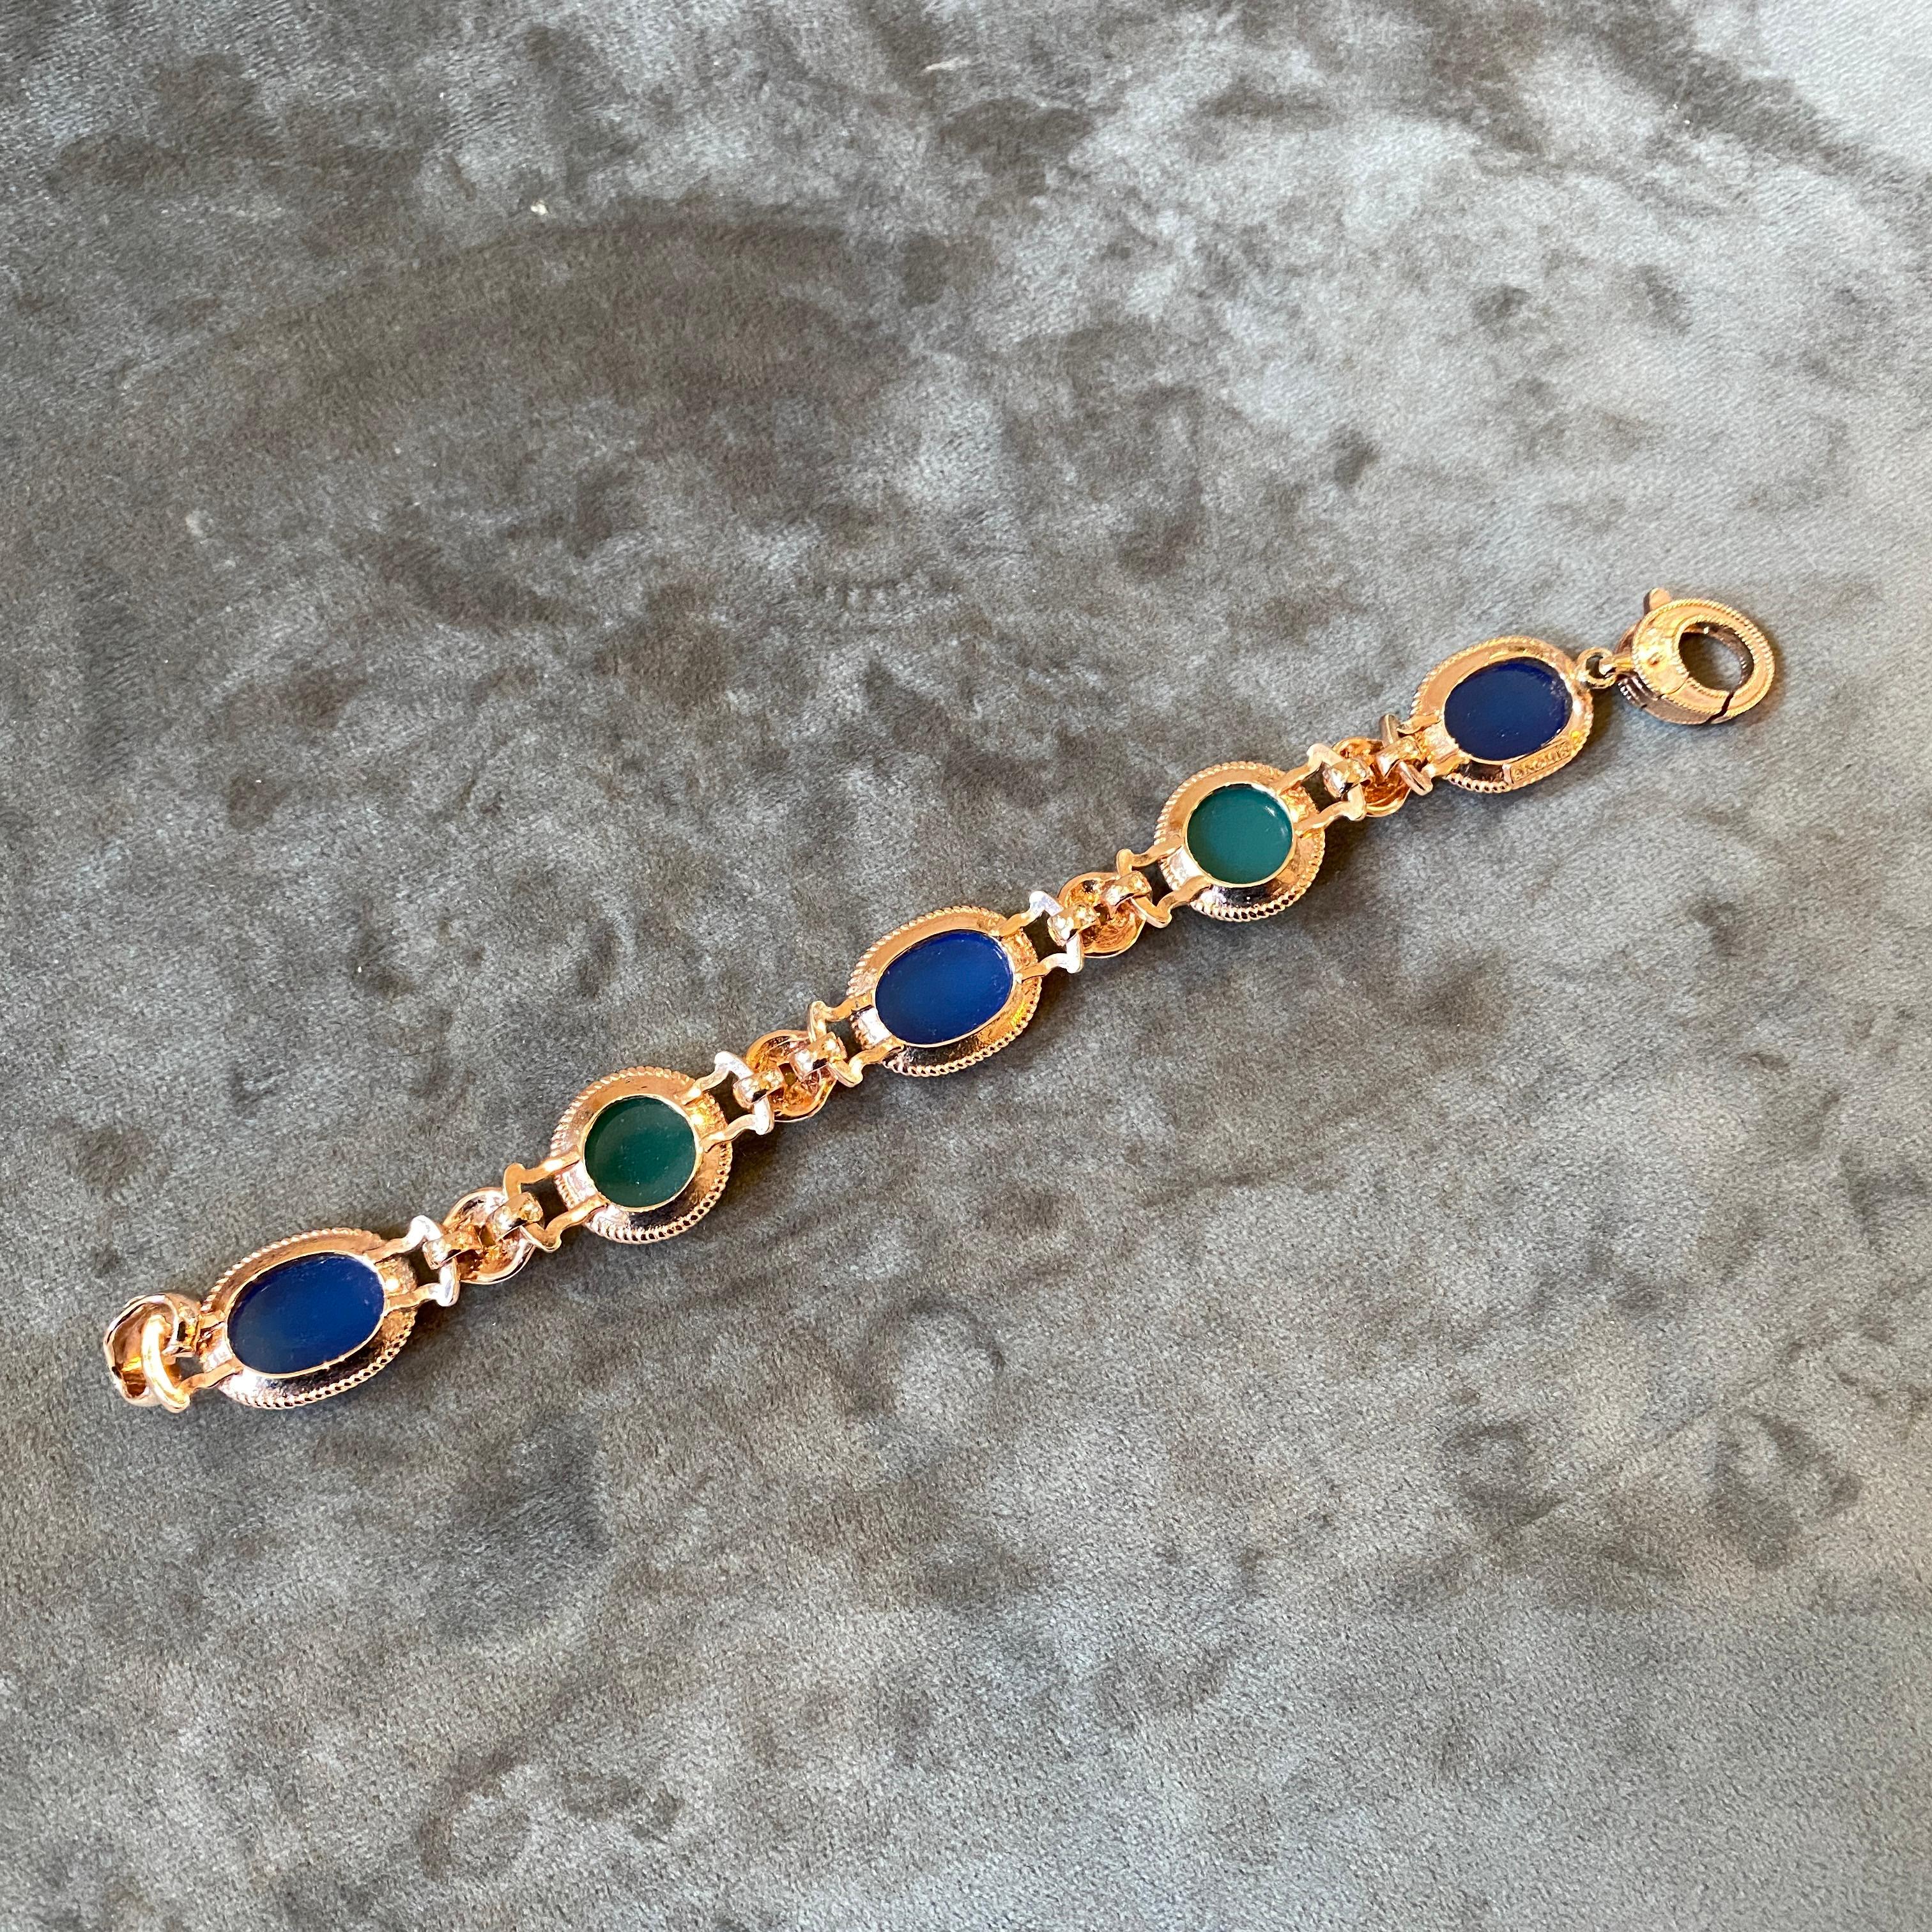 Women's 1990s Green and Blue Agate and Bronze Italian Bracelet by Anomis